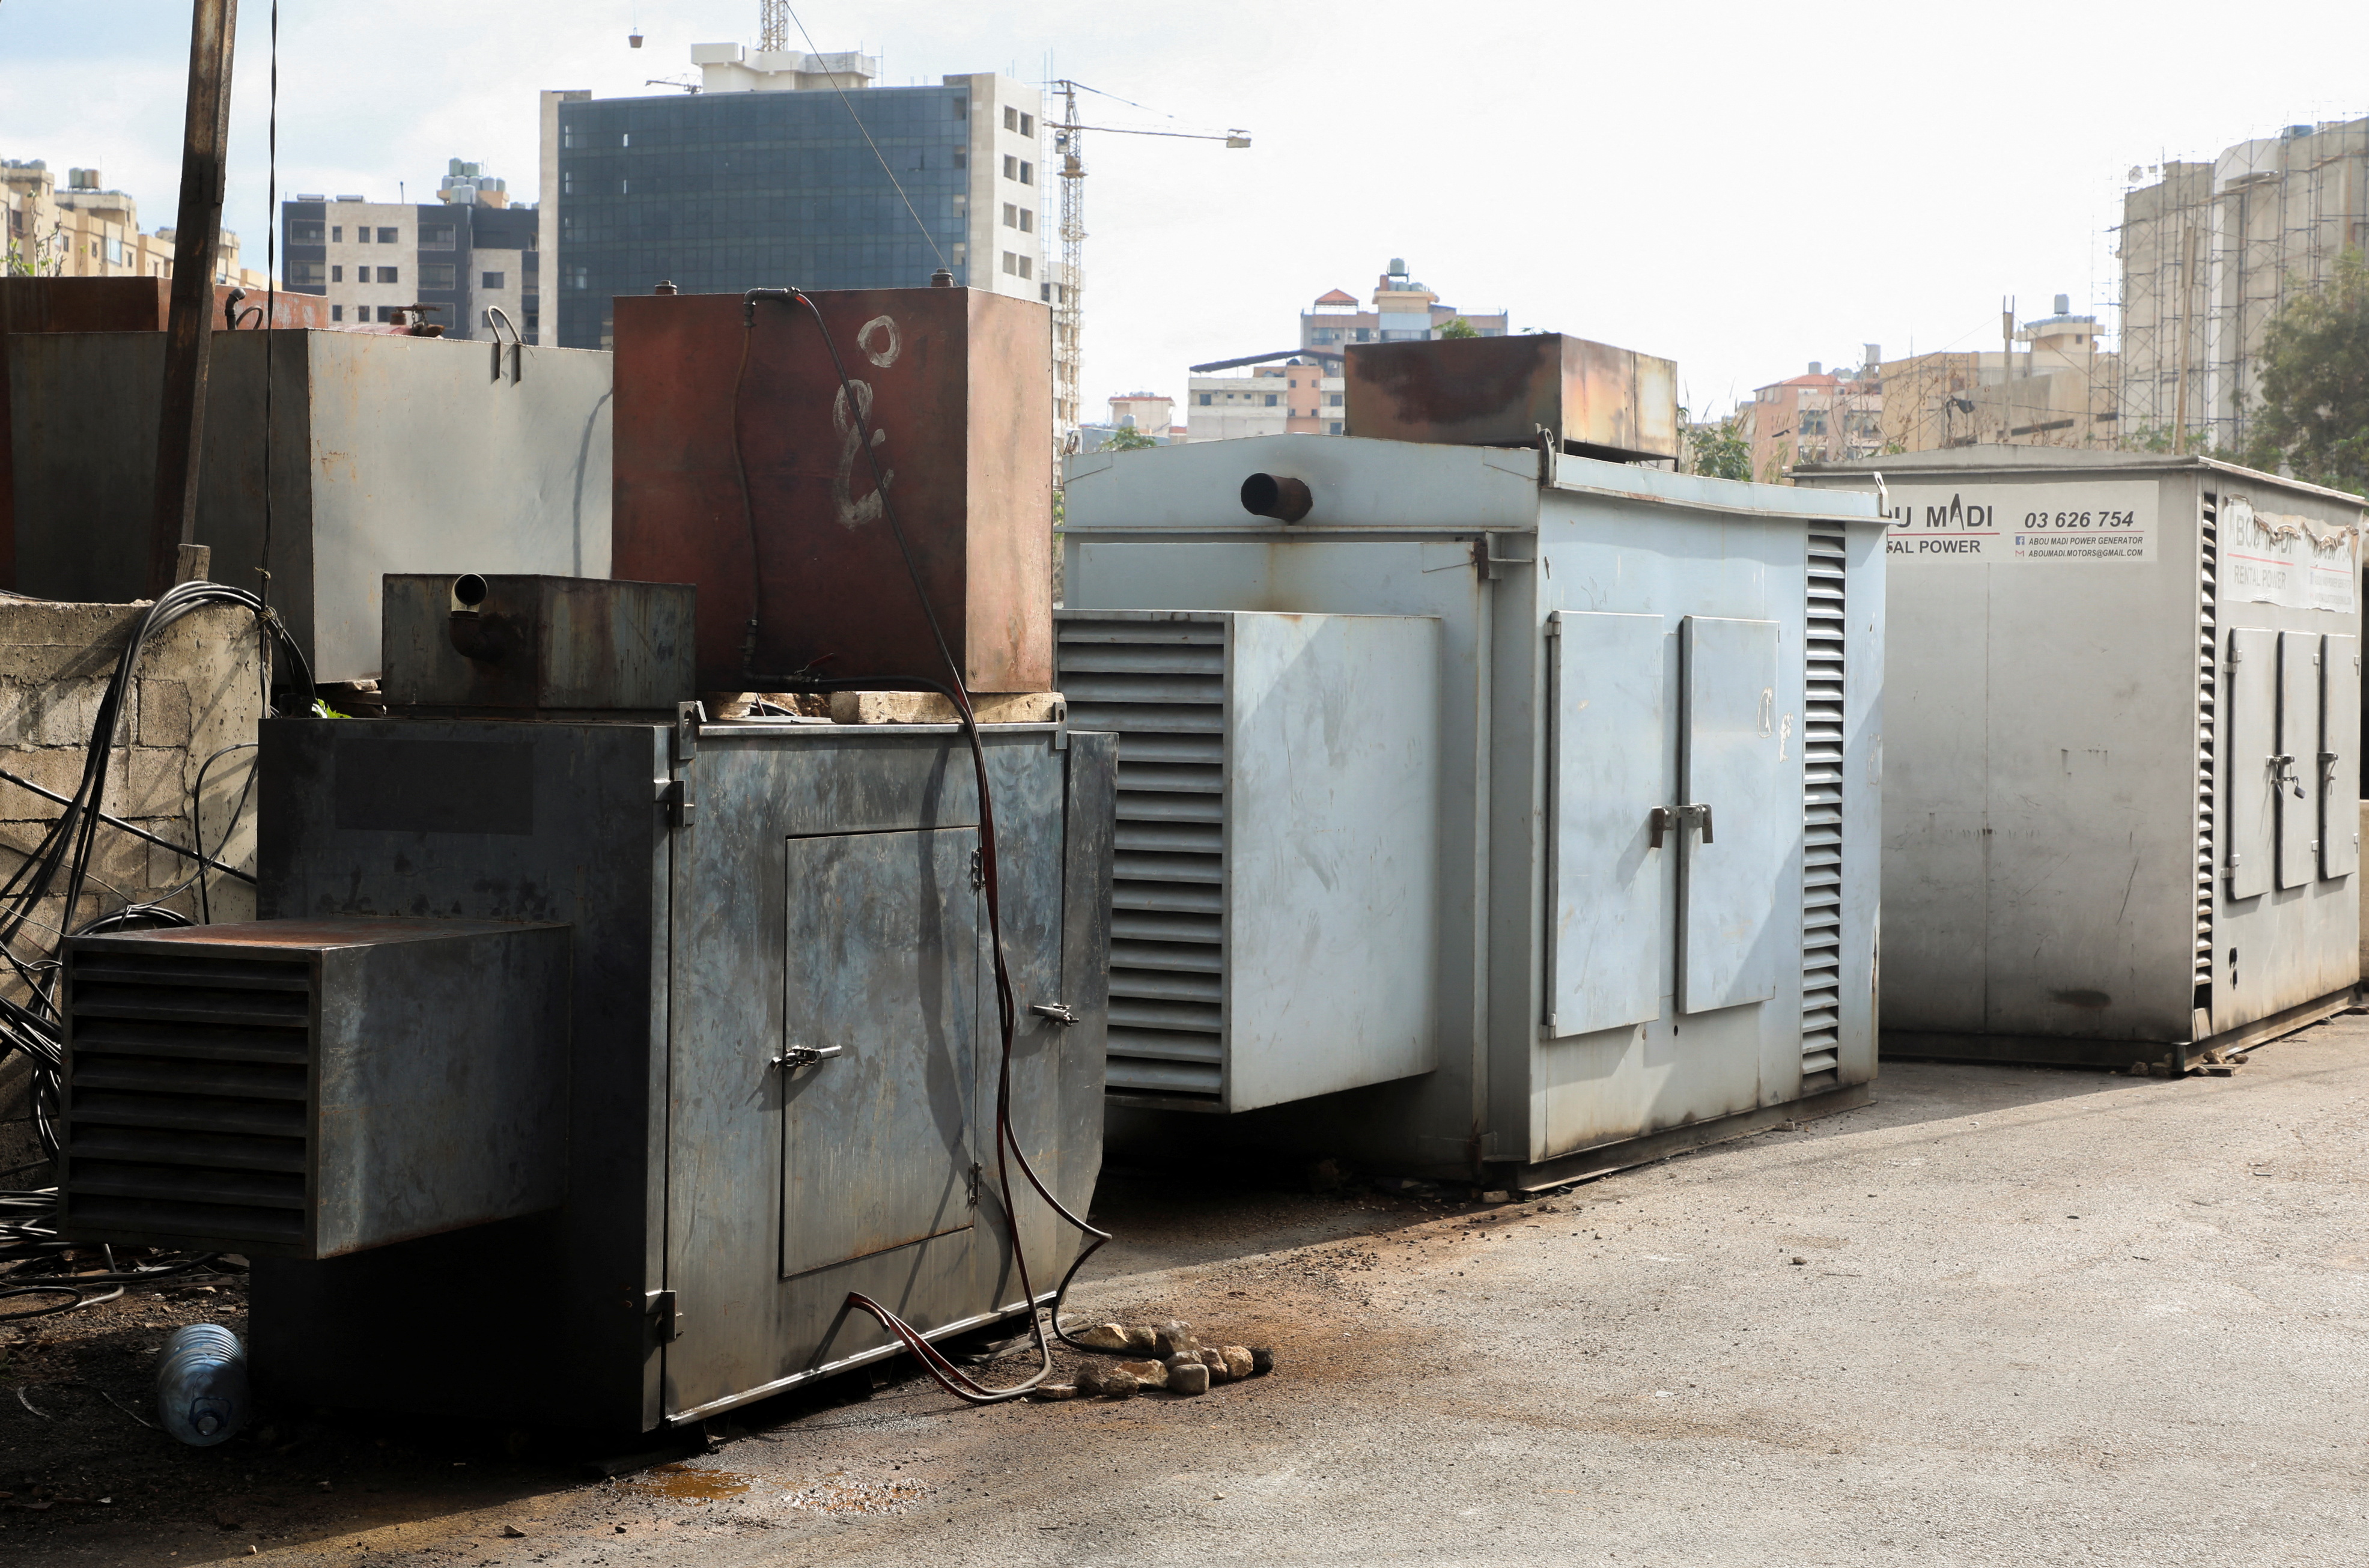 A view shows private generators, which provide electricity, in Beirut